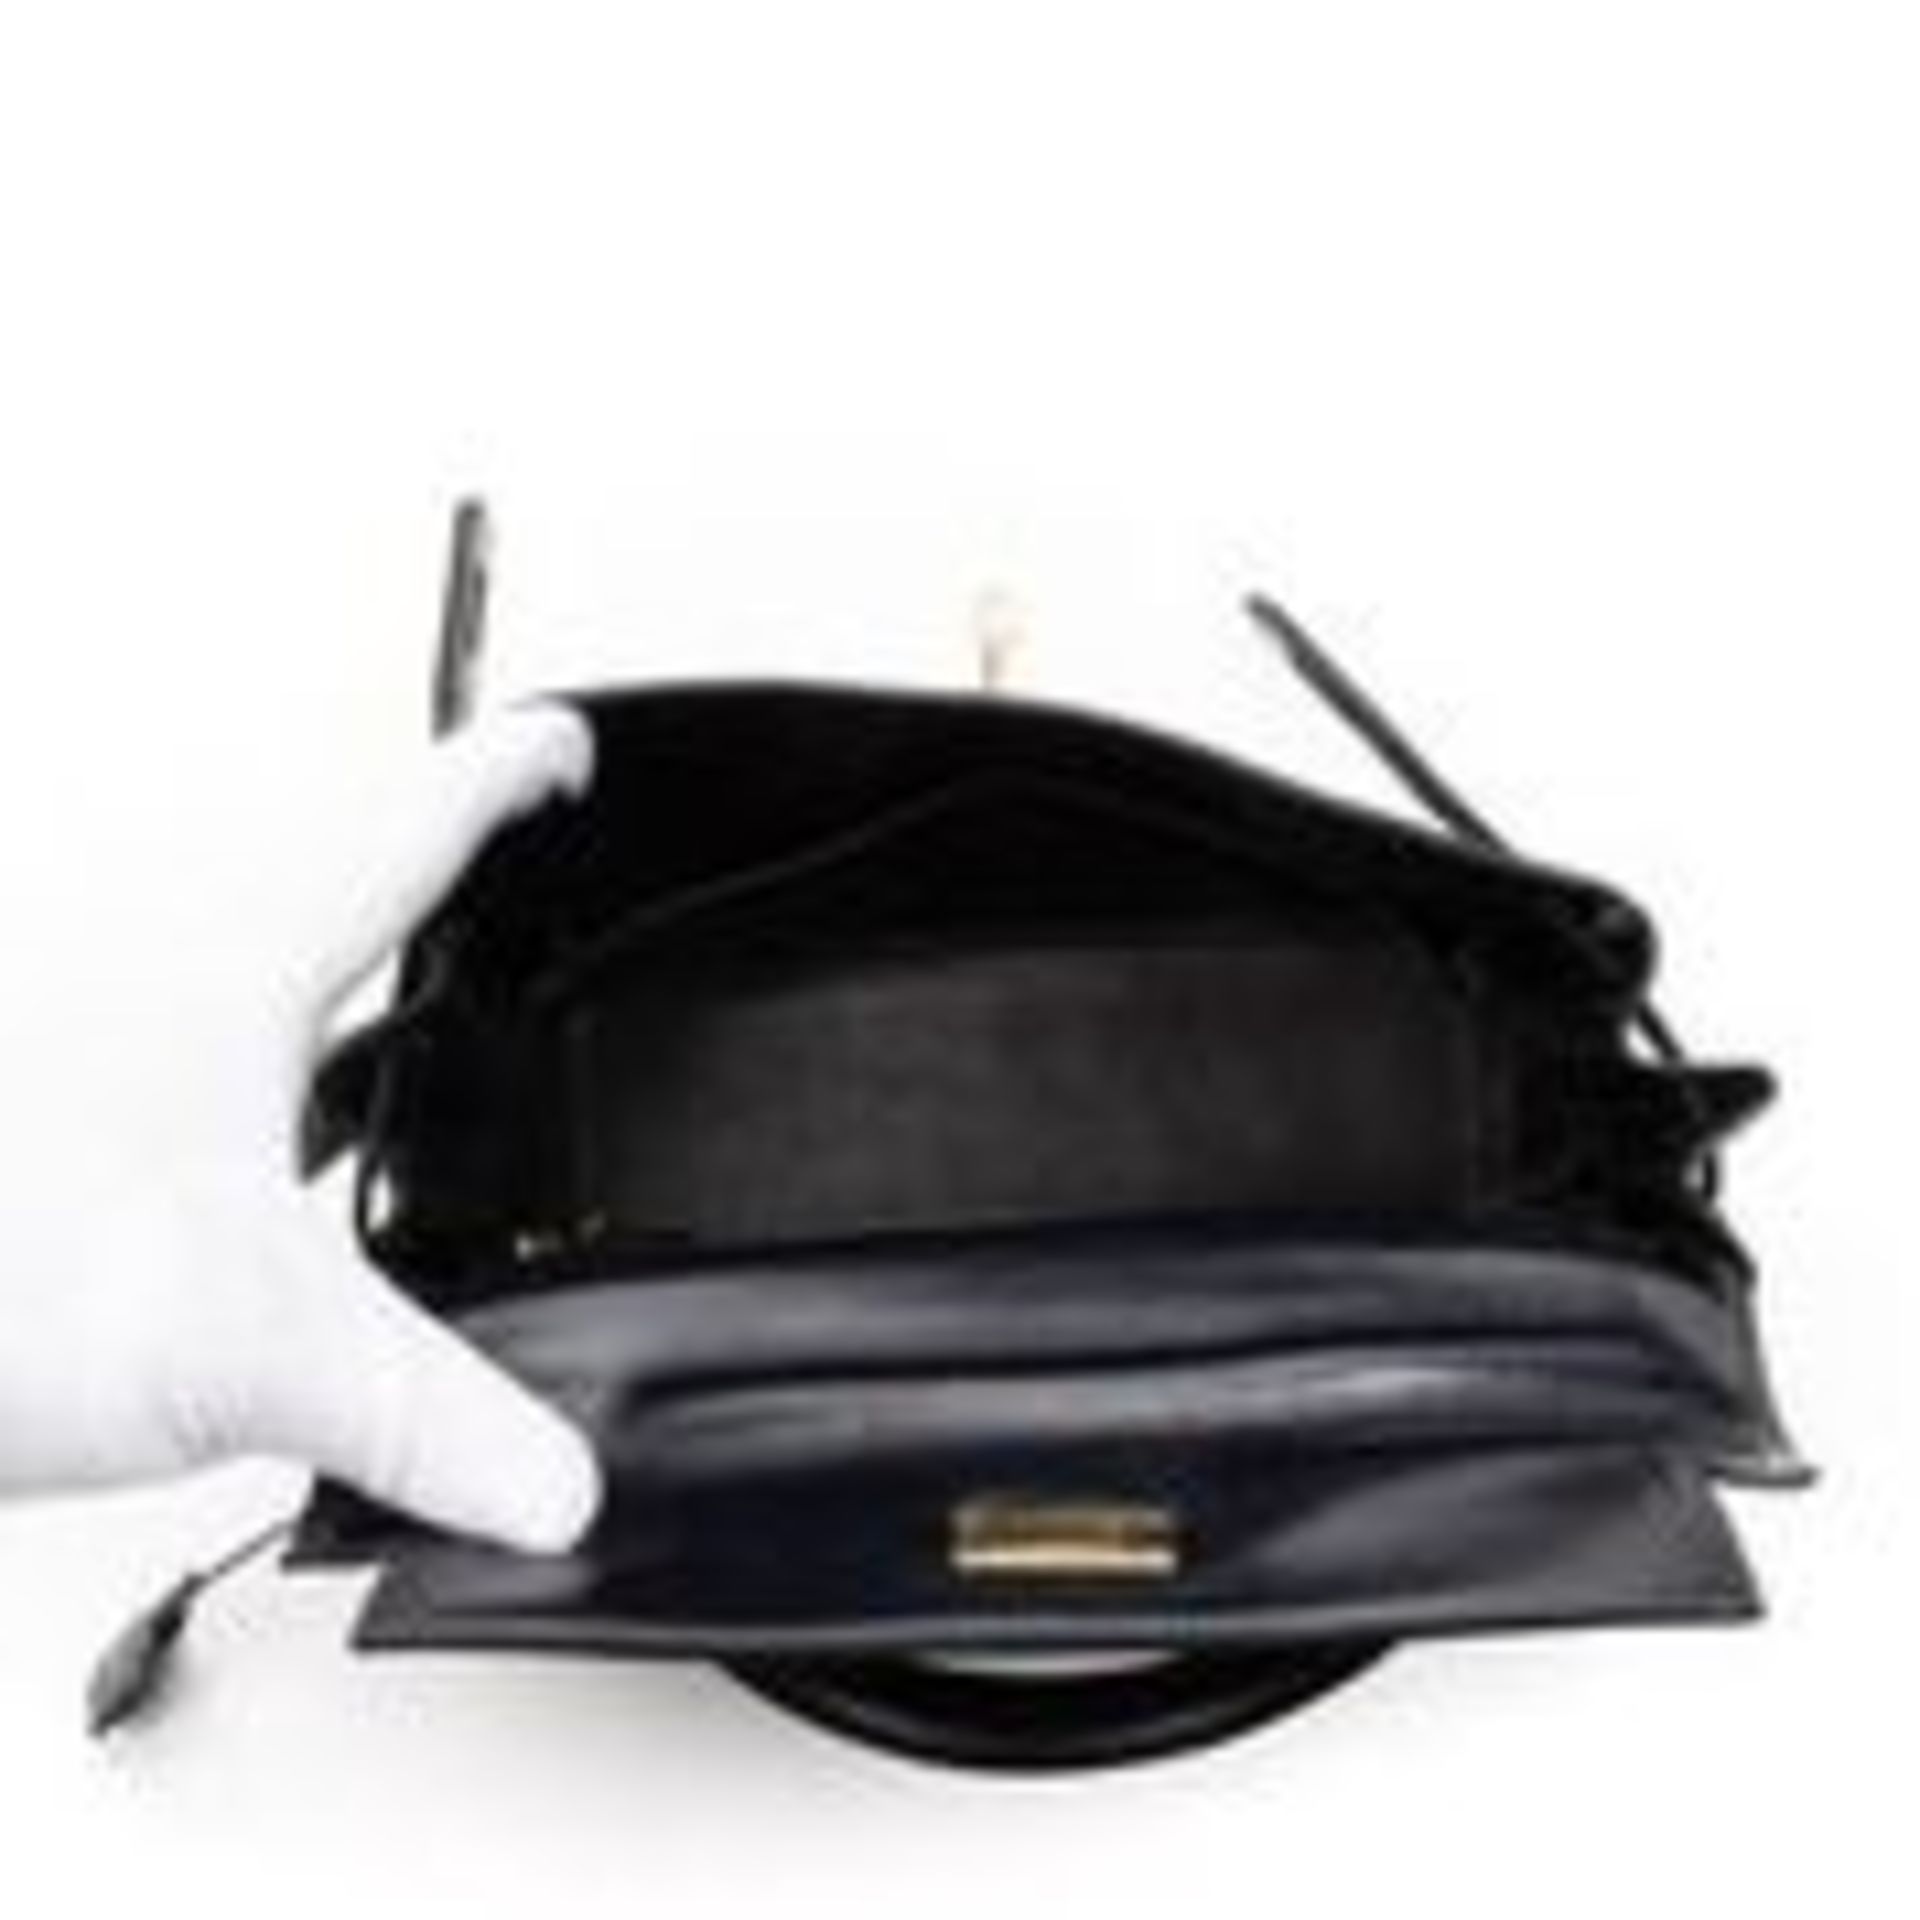 Vintage Hermes Kelly Handbag Navy Blue - EAG5035 - Grade AB - Please Contact Us Directly For - Image 4 of 5